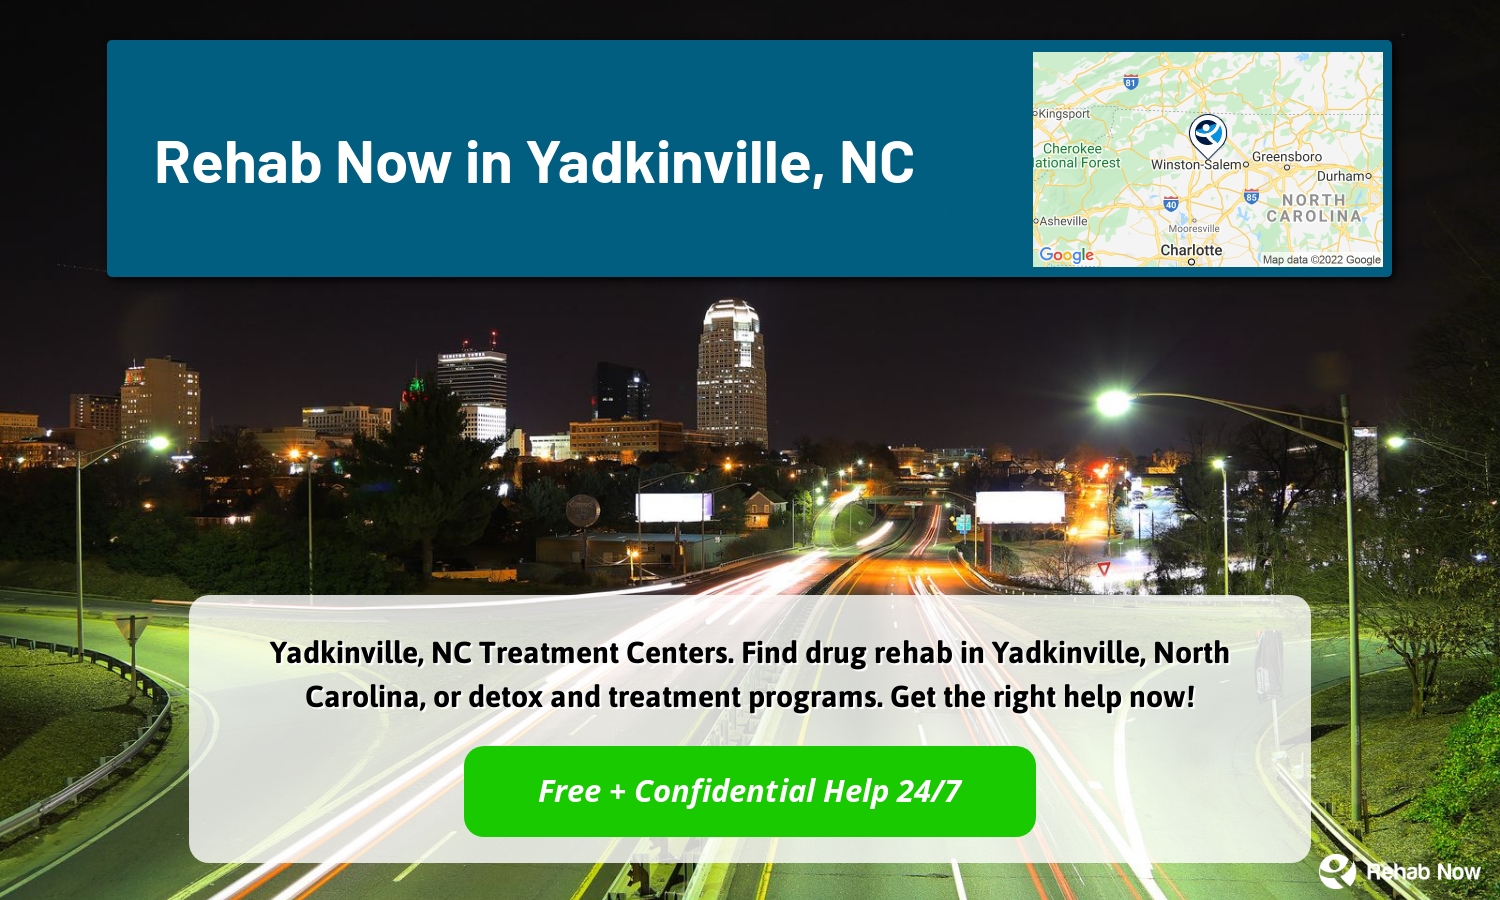 Yadkinville, NC Treatment Centers. Find drug rehab in Yadkinville, North Carolina, or detox and treatment programs. Get the right help now!